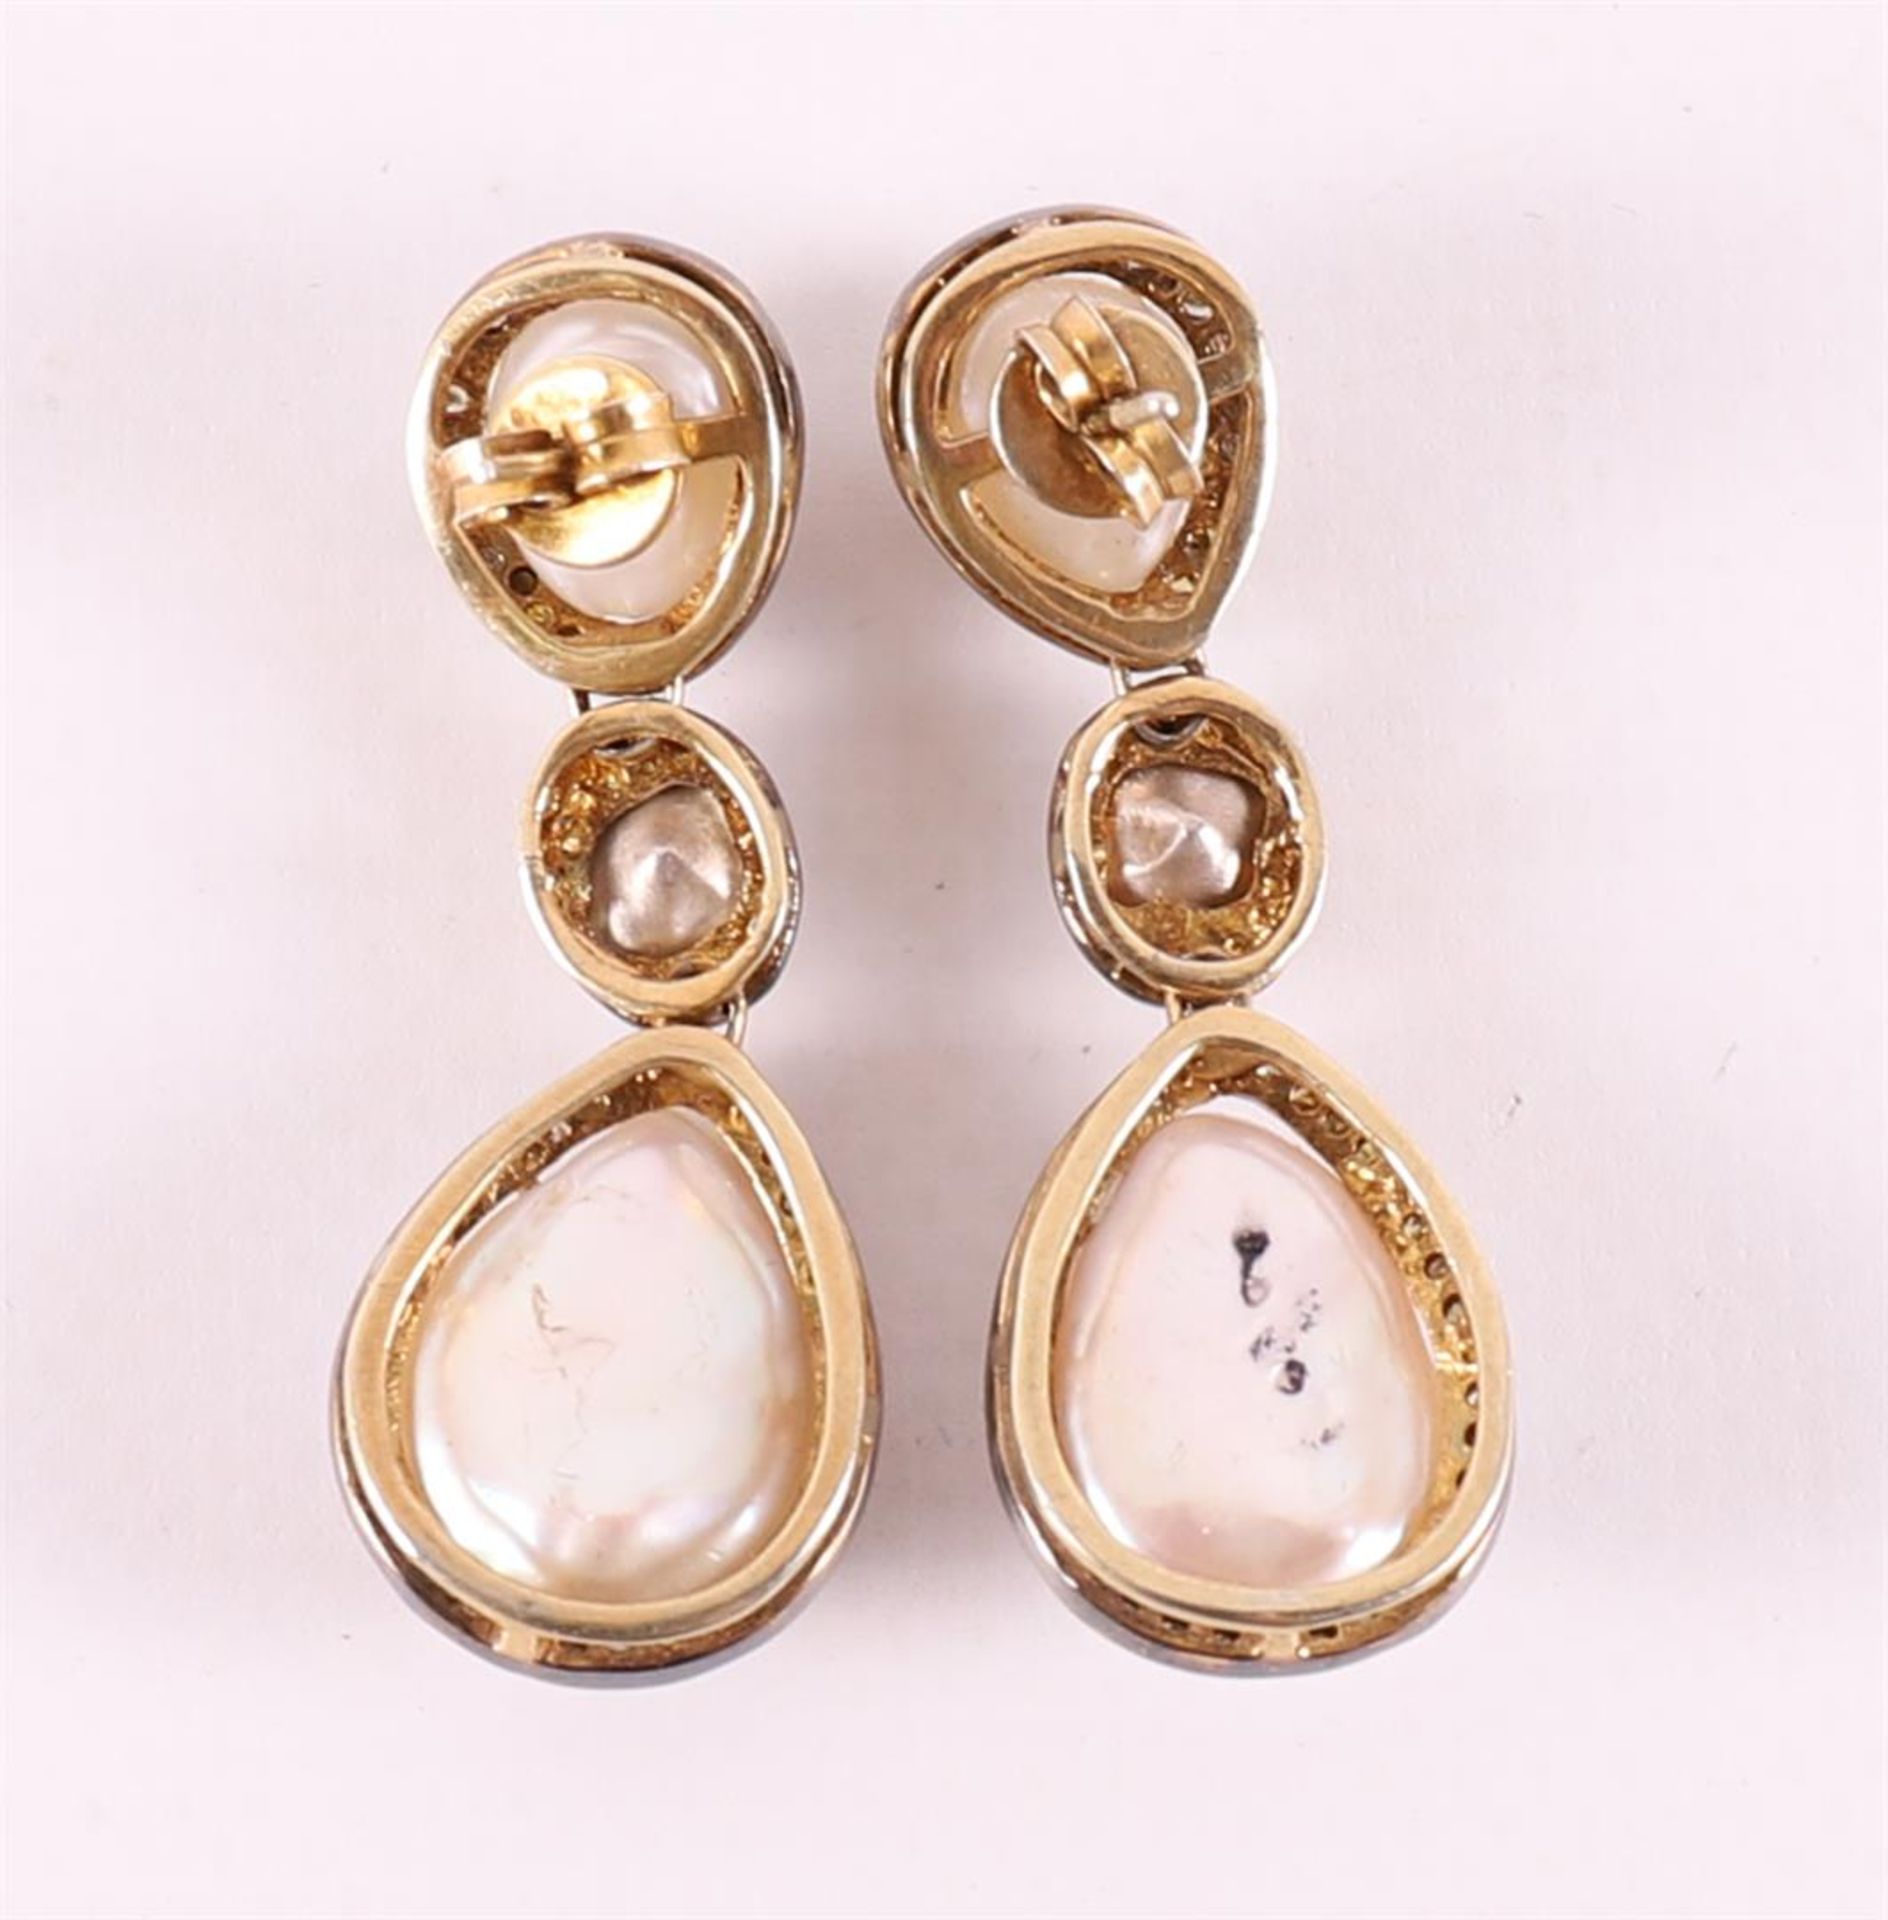 A pair of partly gold-plated silver earrings with 4 pearls, surrounded by diamon - Bild 2 aus 2